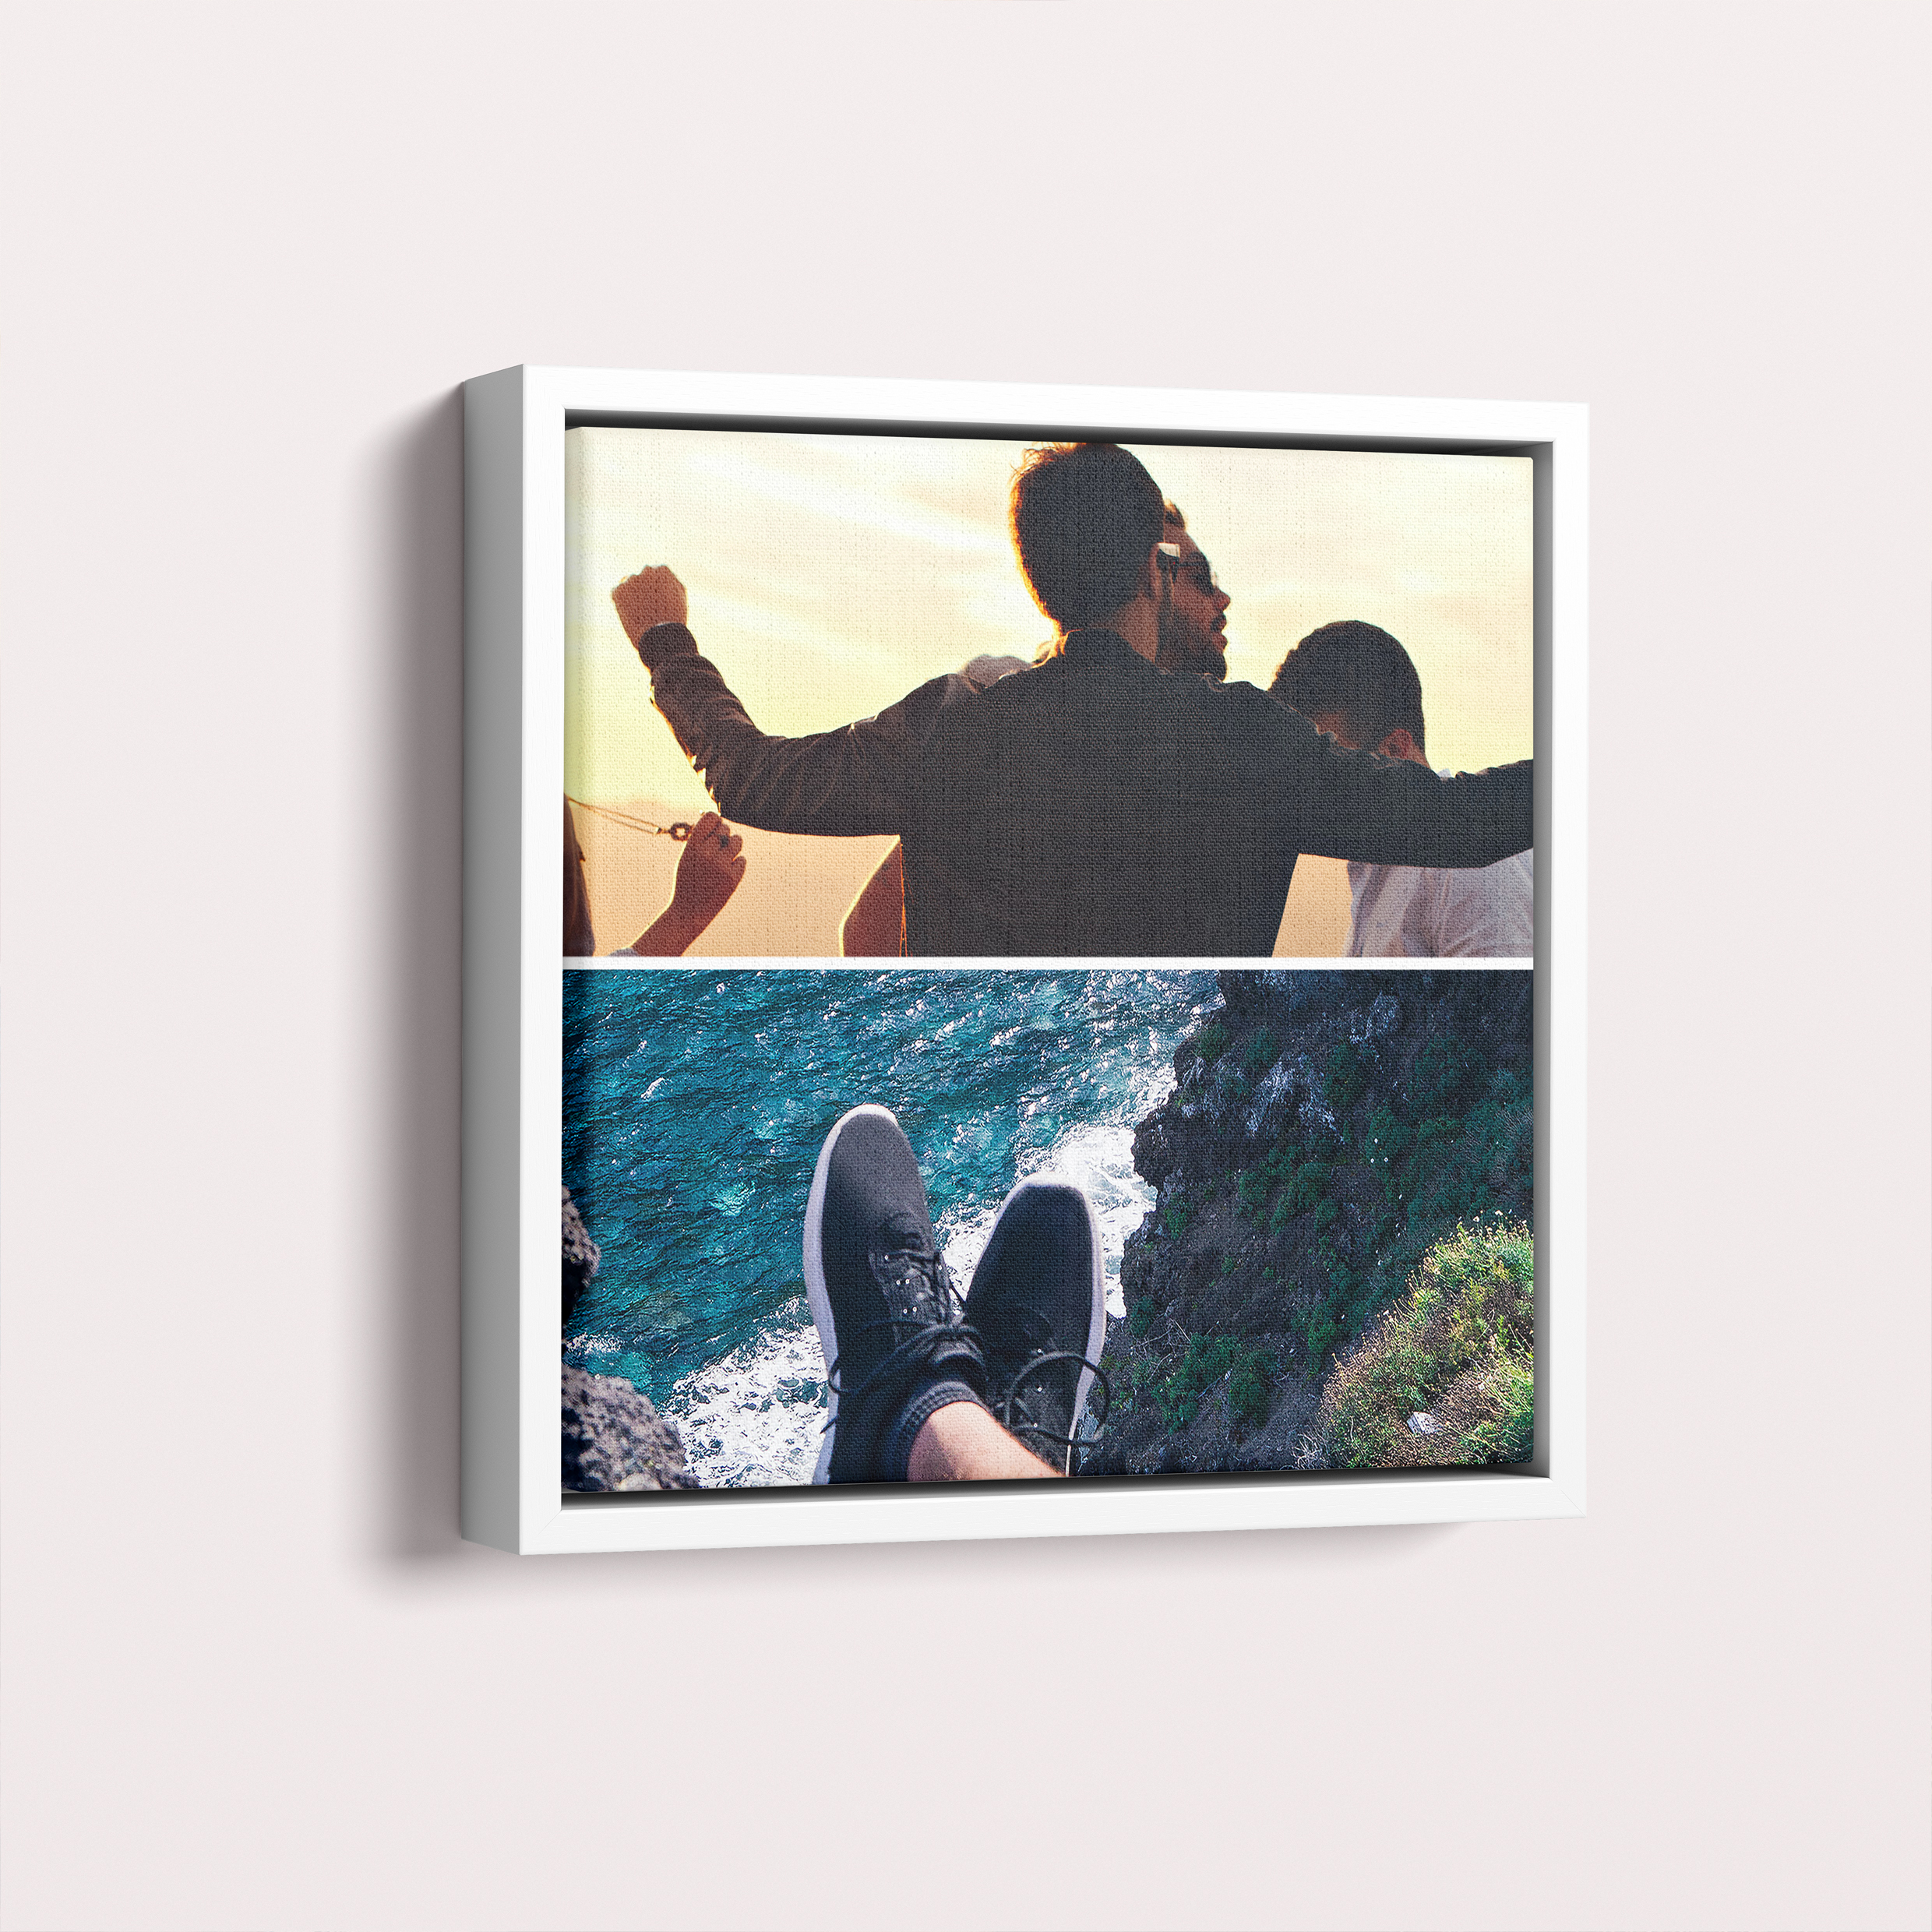 Unforgettable Holiday Framed Photo Canvases - A captivating portrait display for three photos, capturing the essence of your extraordinary vacation.